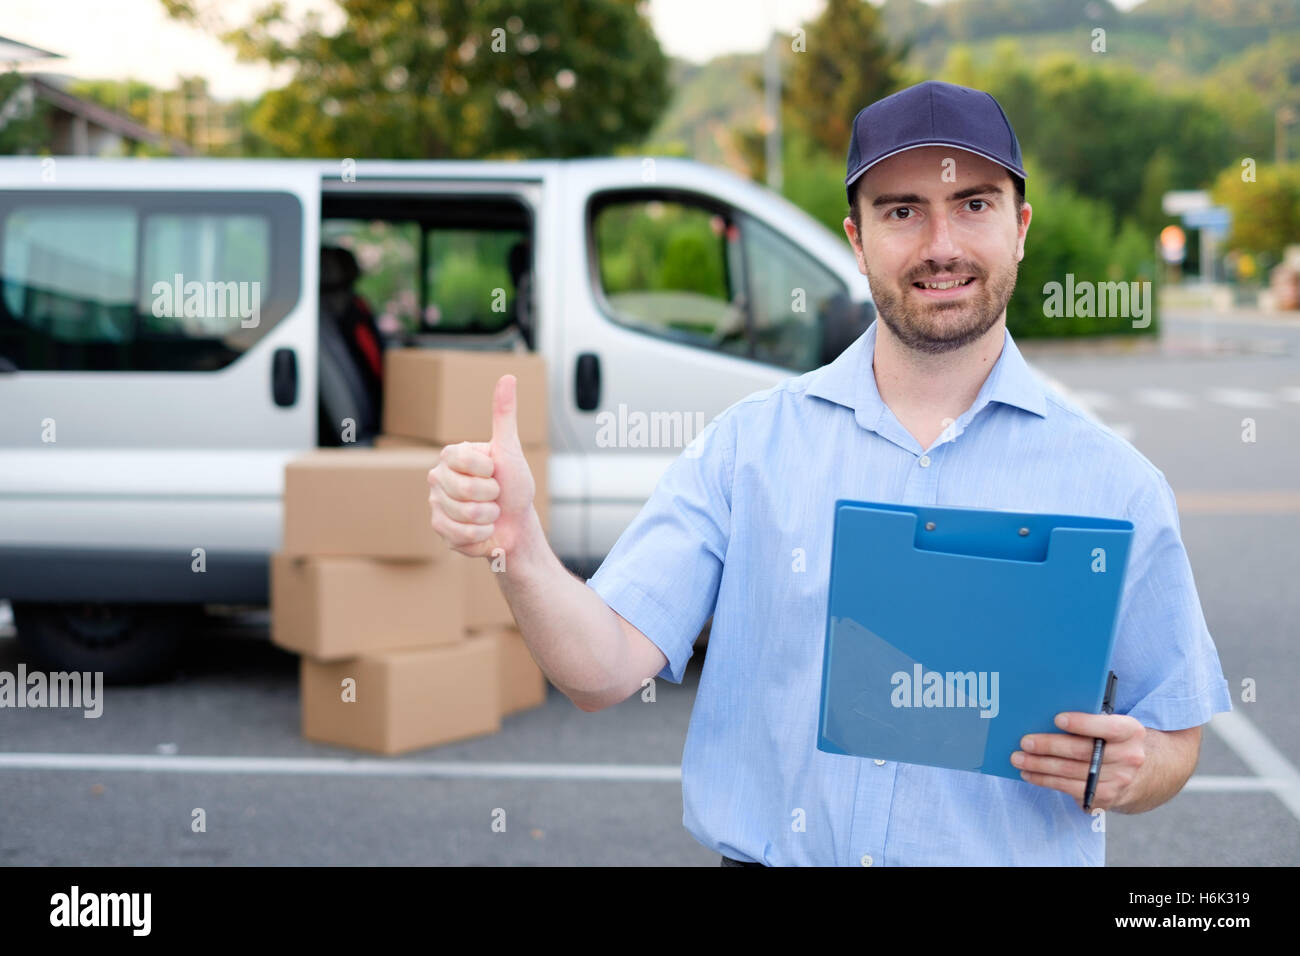 Portrait of confidence express courier next to his delivery van Stock Photo